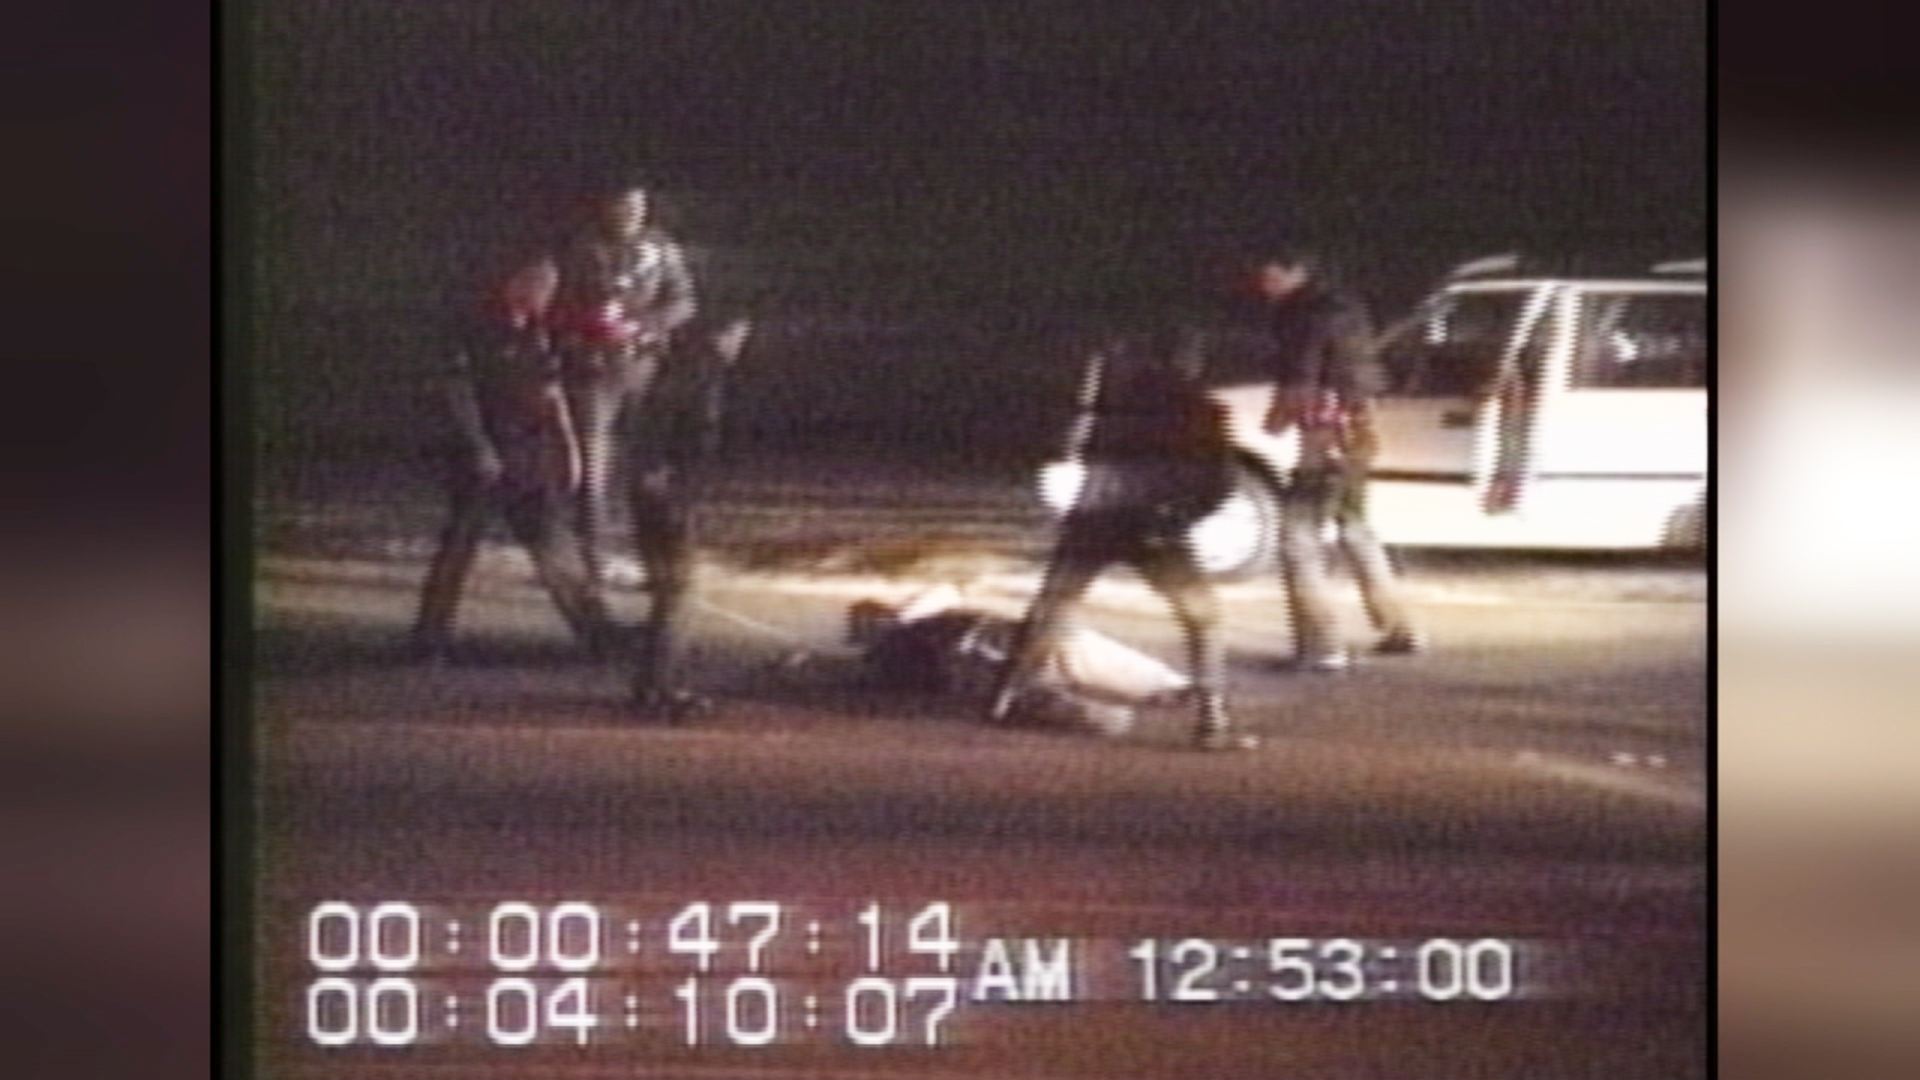 Rodney King Beating 25 Years Ago Opened Era Of Viral Cop Videos